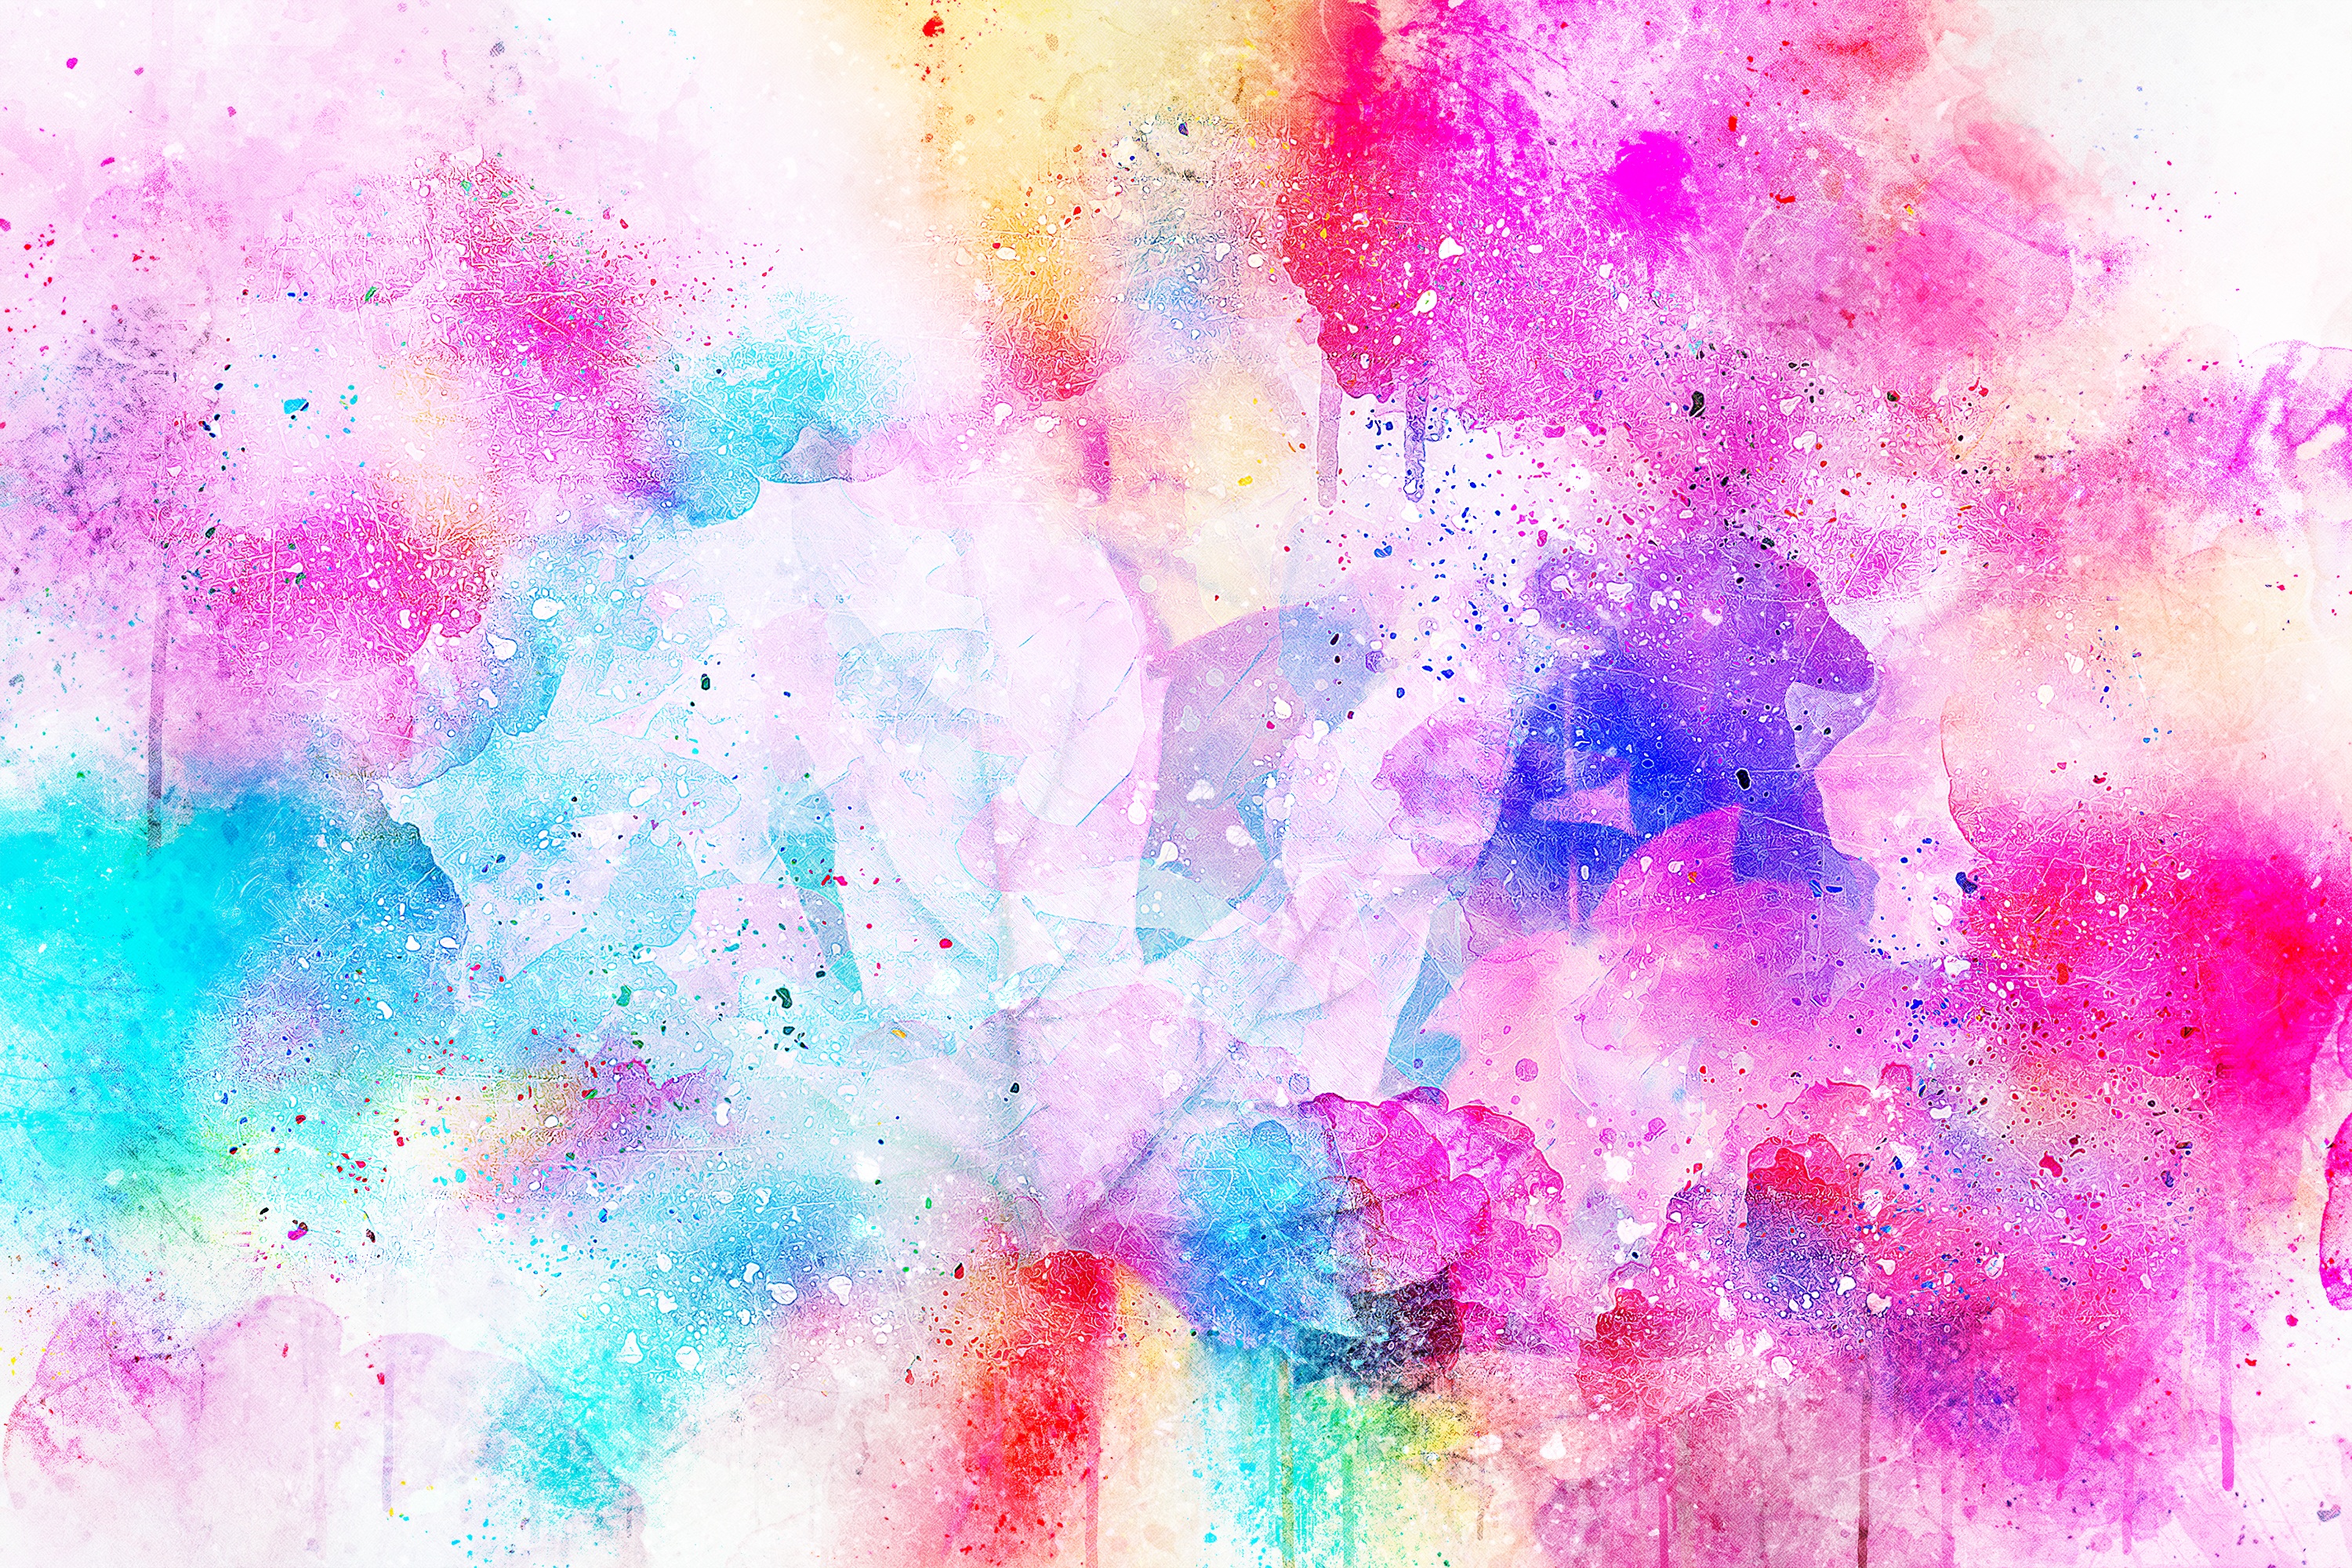 bright, abstract, pink, stains, spots, watercolor